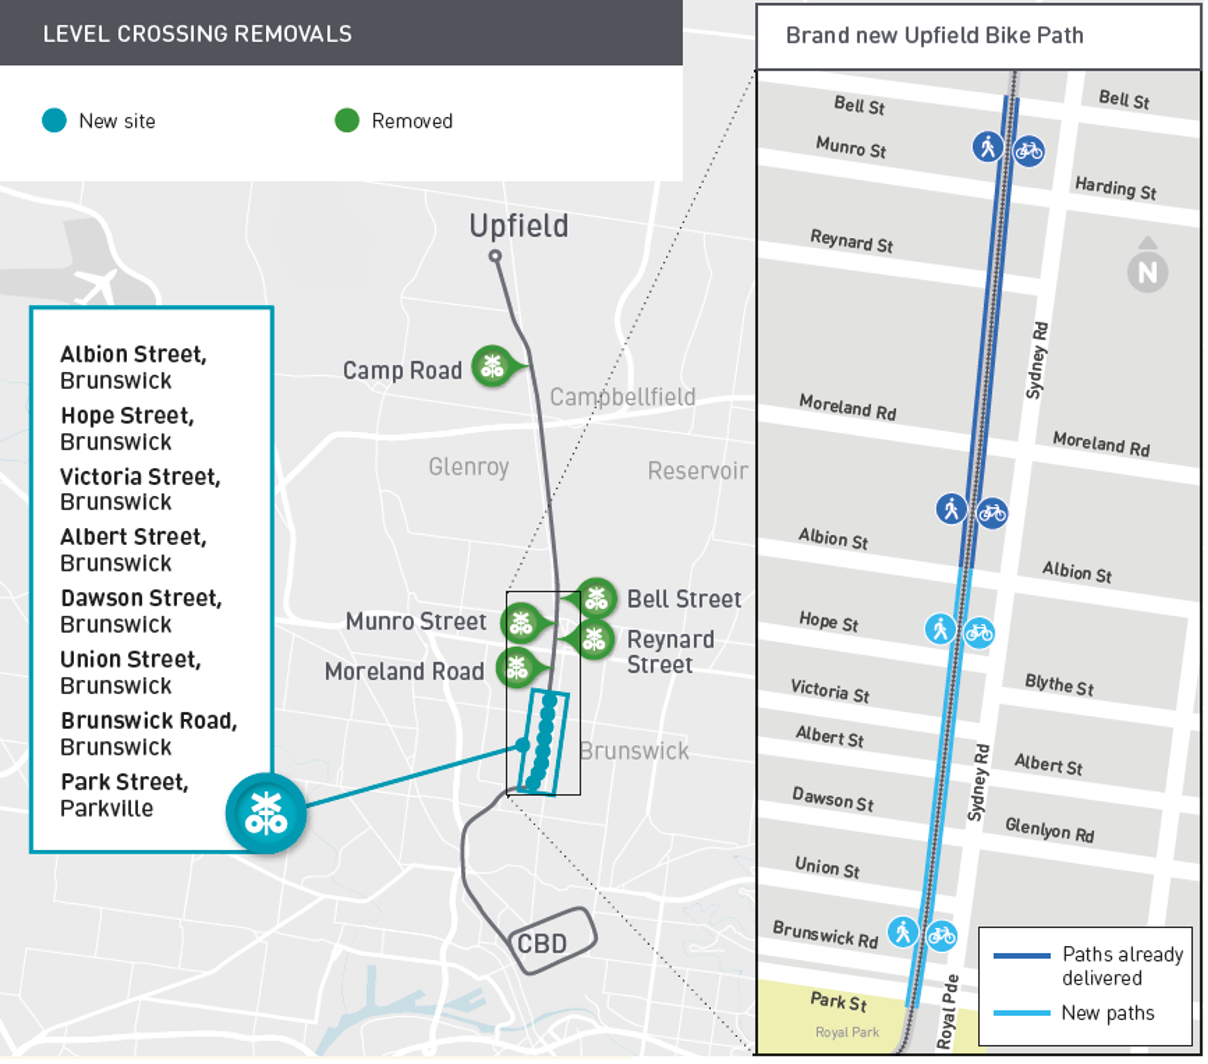 Map of Upfield Line showing removals at Camp Road, Bell Street, Munro Street, Reynard Street and Moreland Road, with upcoming removals in Brunswick.